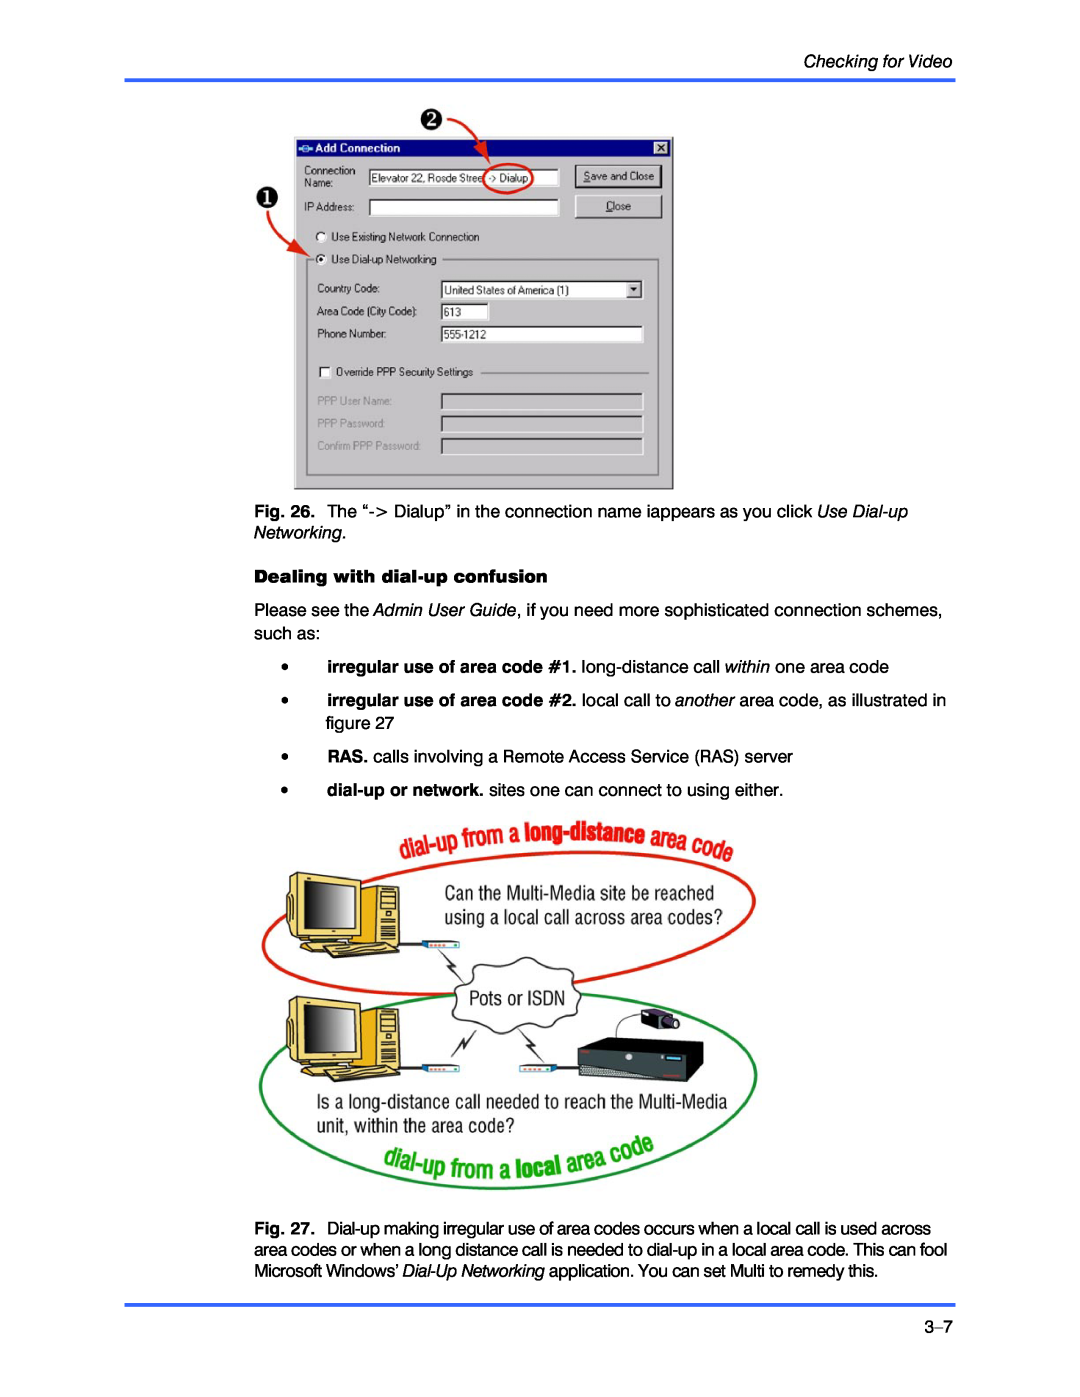 Honeywell K9696V2 installation instructions Dealing with dial-upconfusion, Checking for Video 